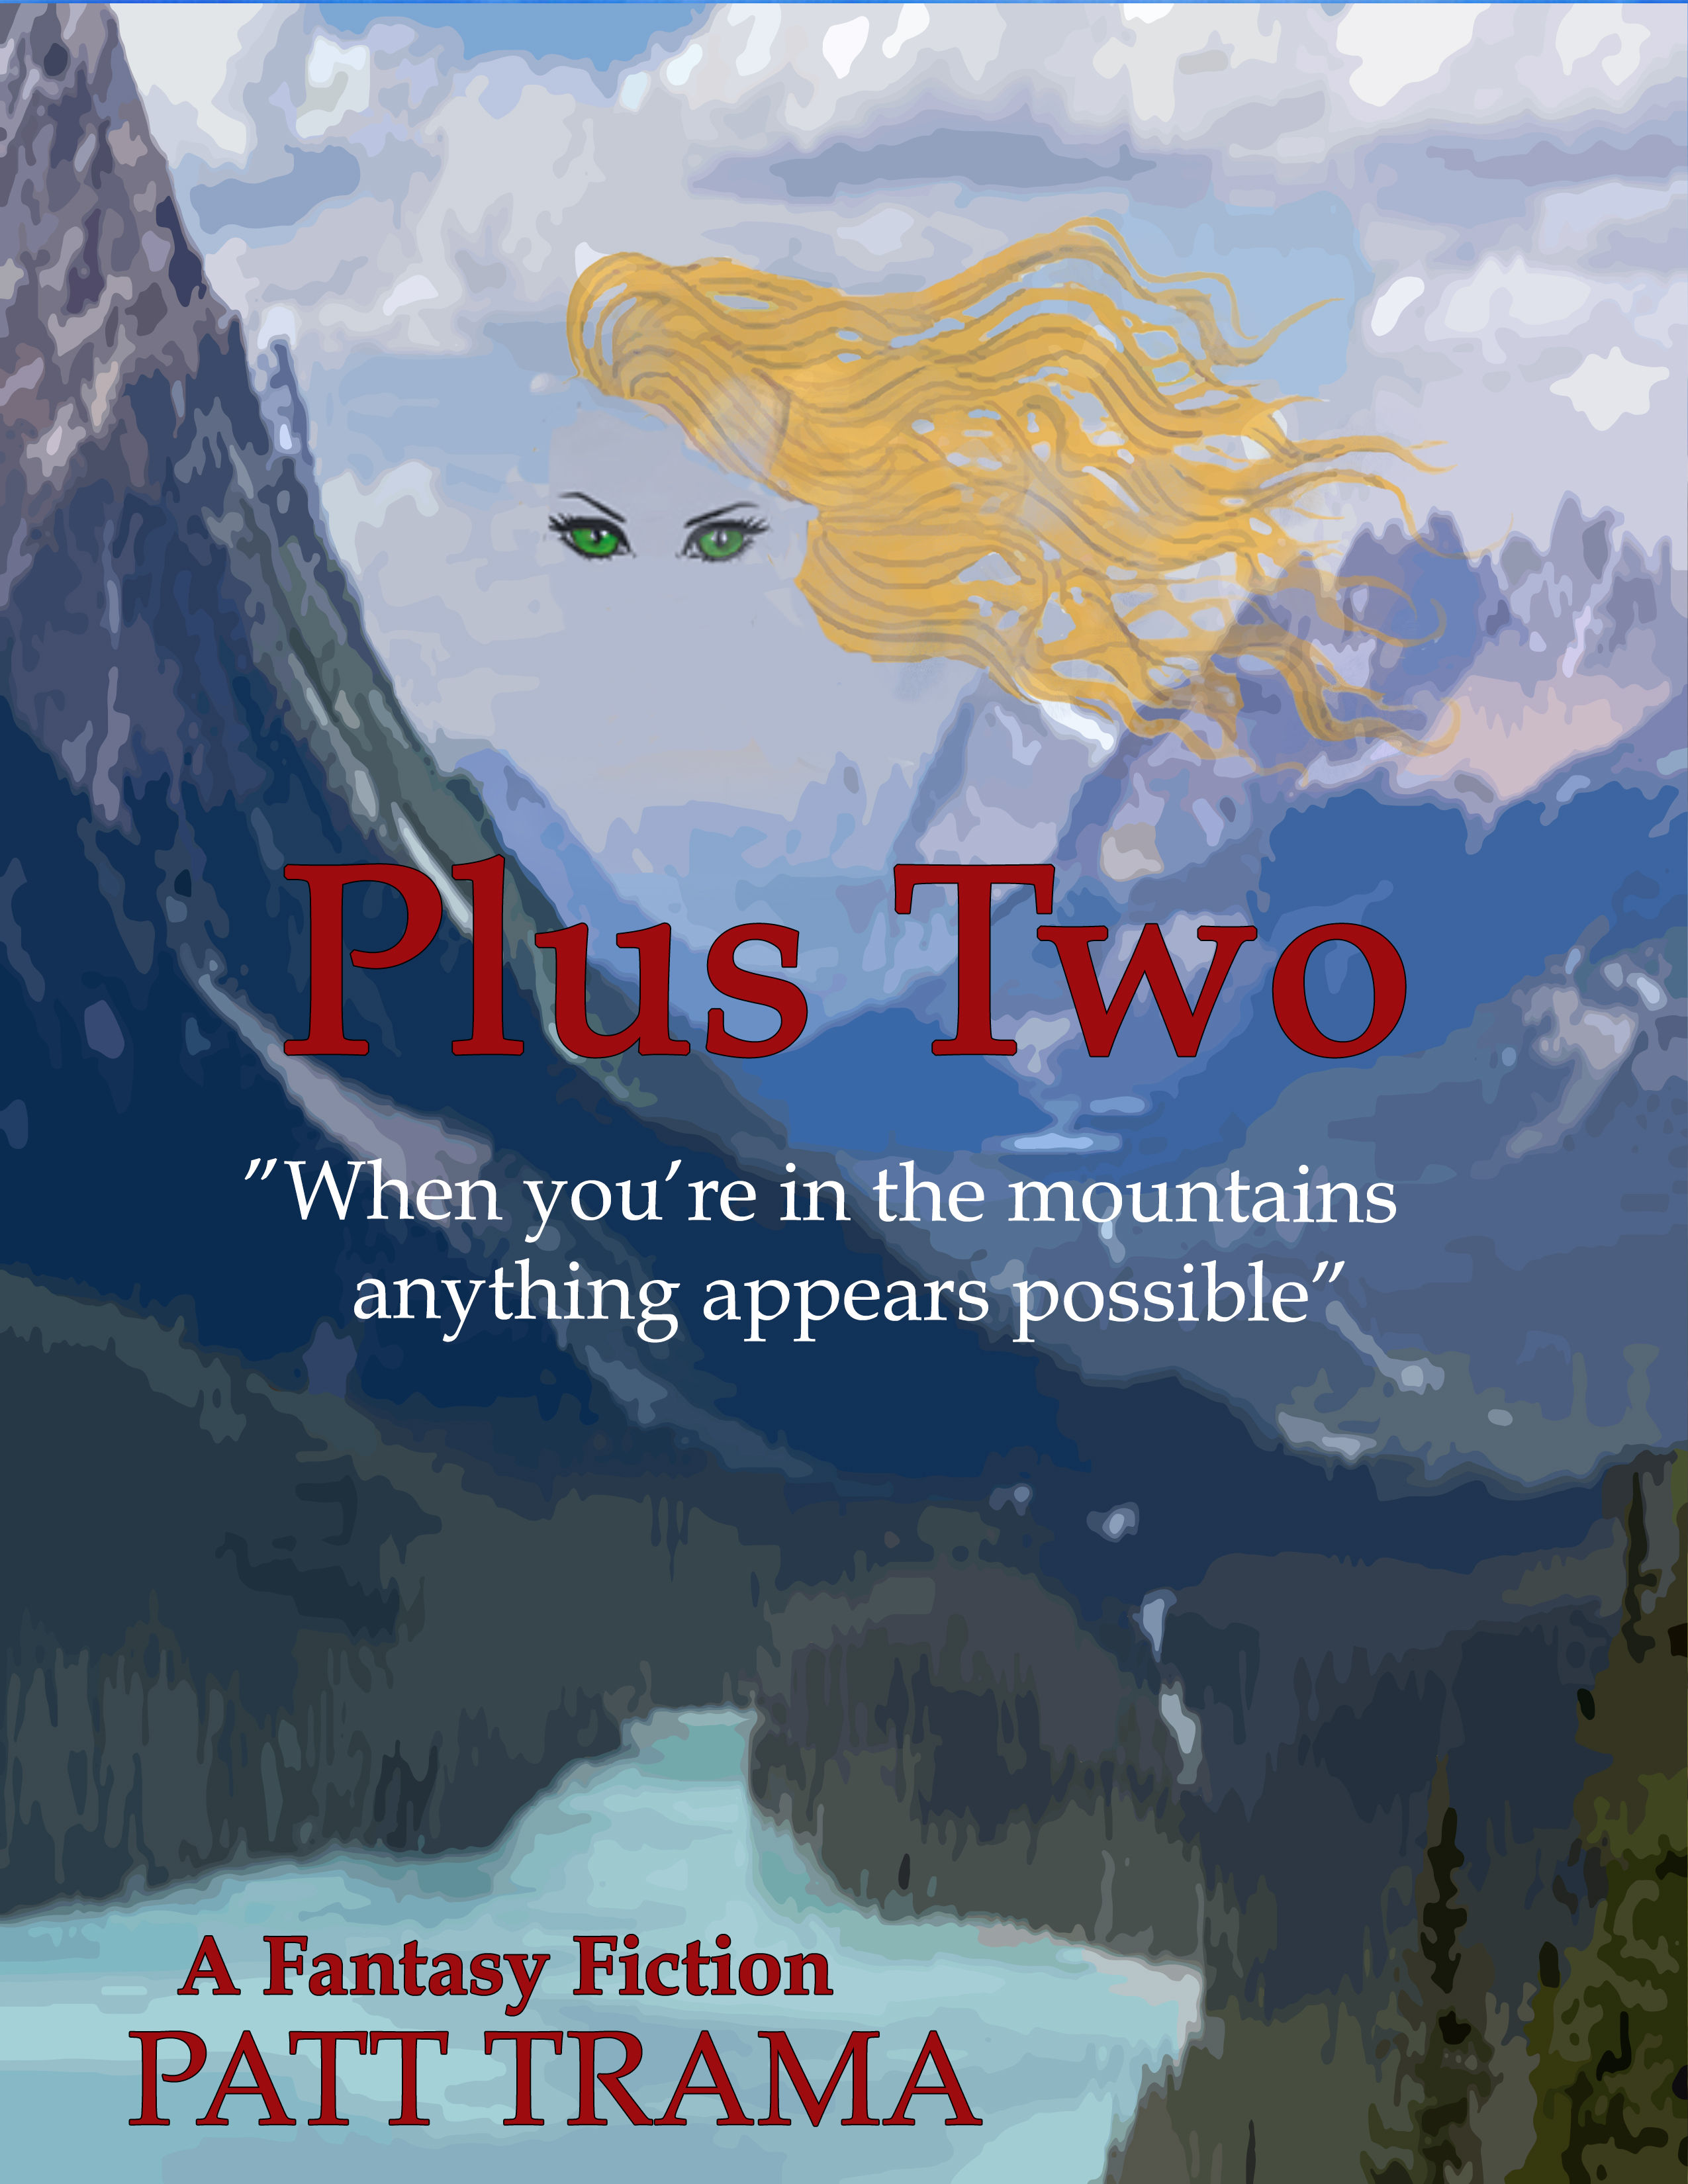 Plus Two Experience, a fiction novel by Patt Trama